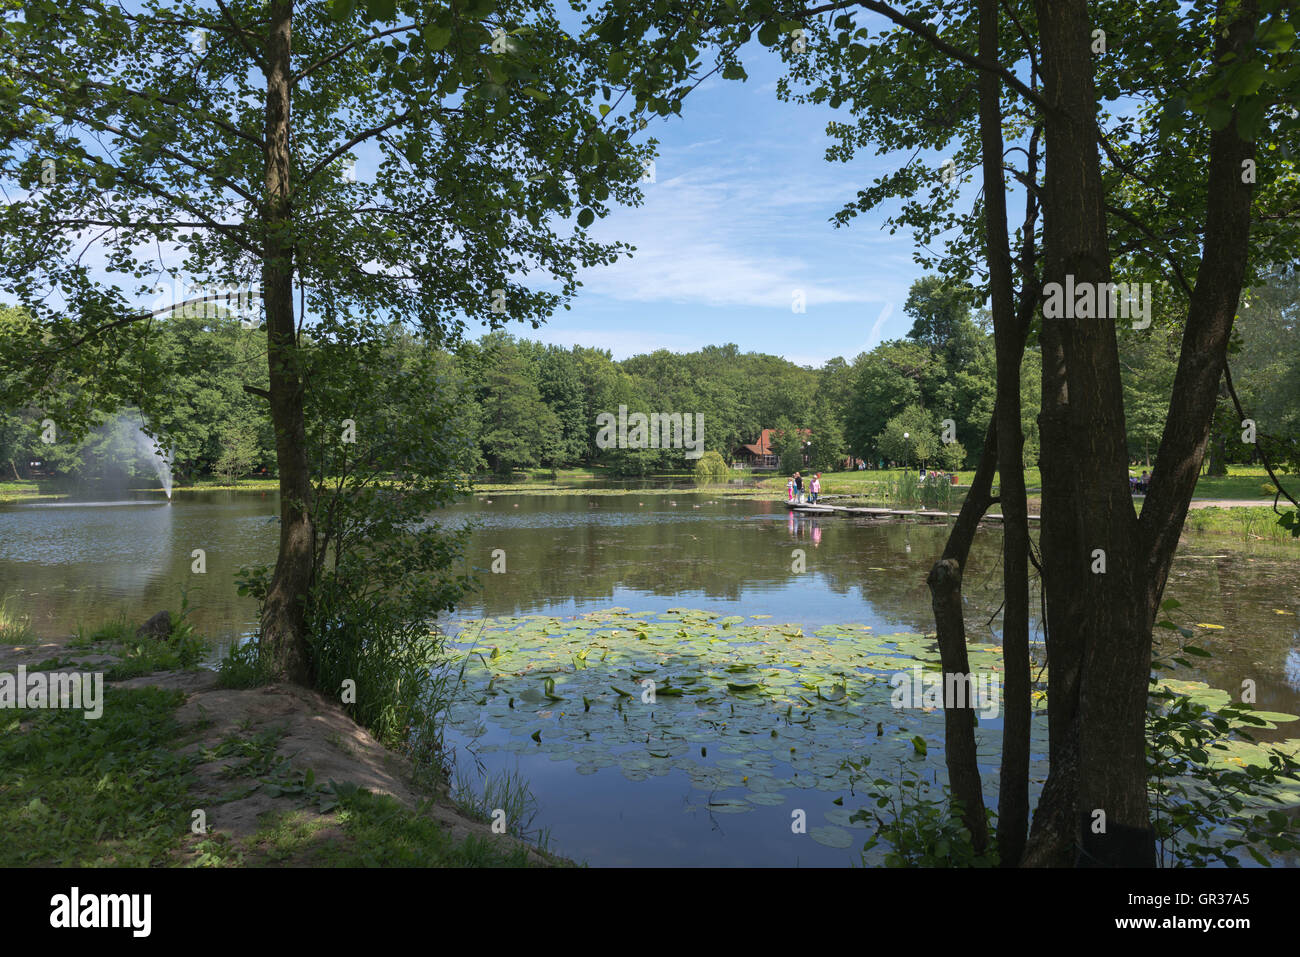 A small lake with water-lilies in the City Park of Zelenogradsk, ex Cranz, Kaliningrad Region, Russia, Stock Photo